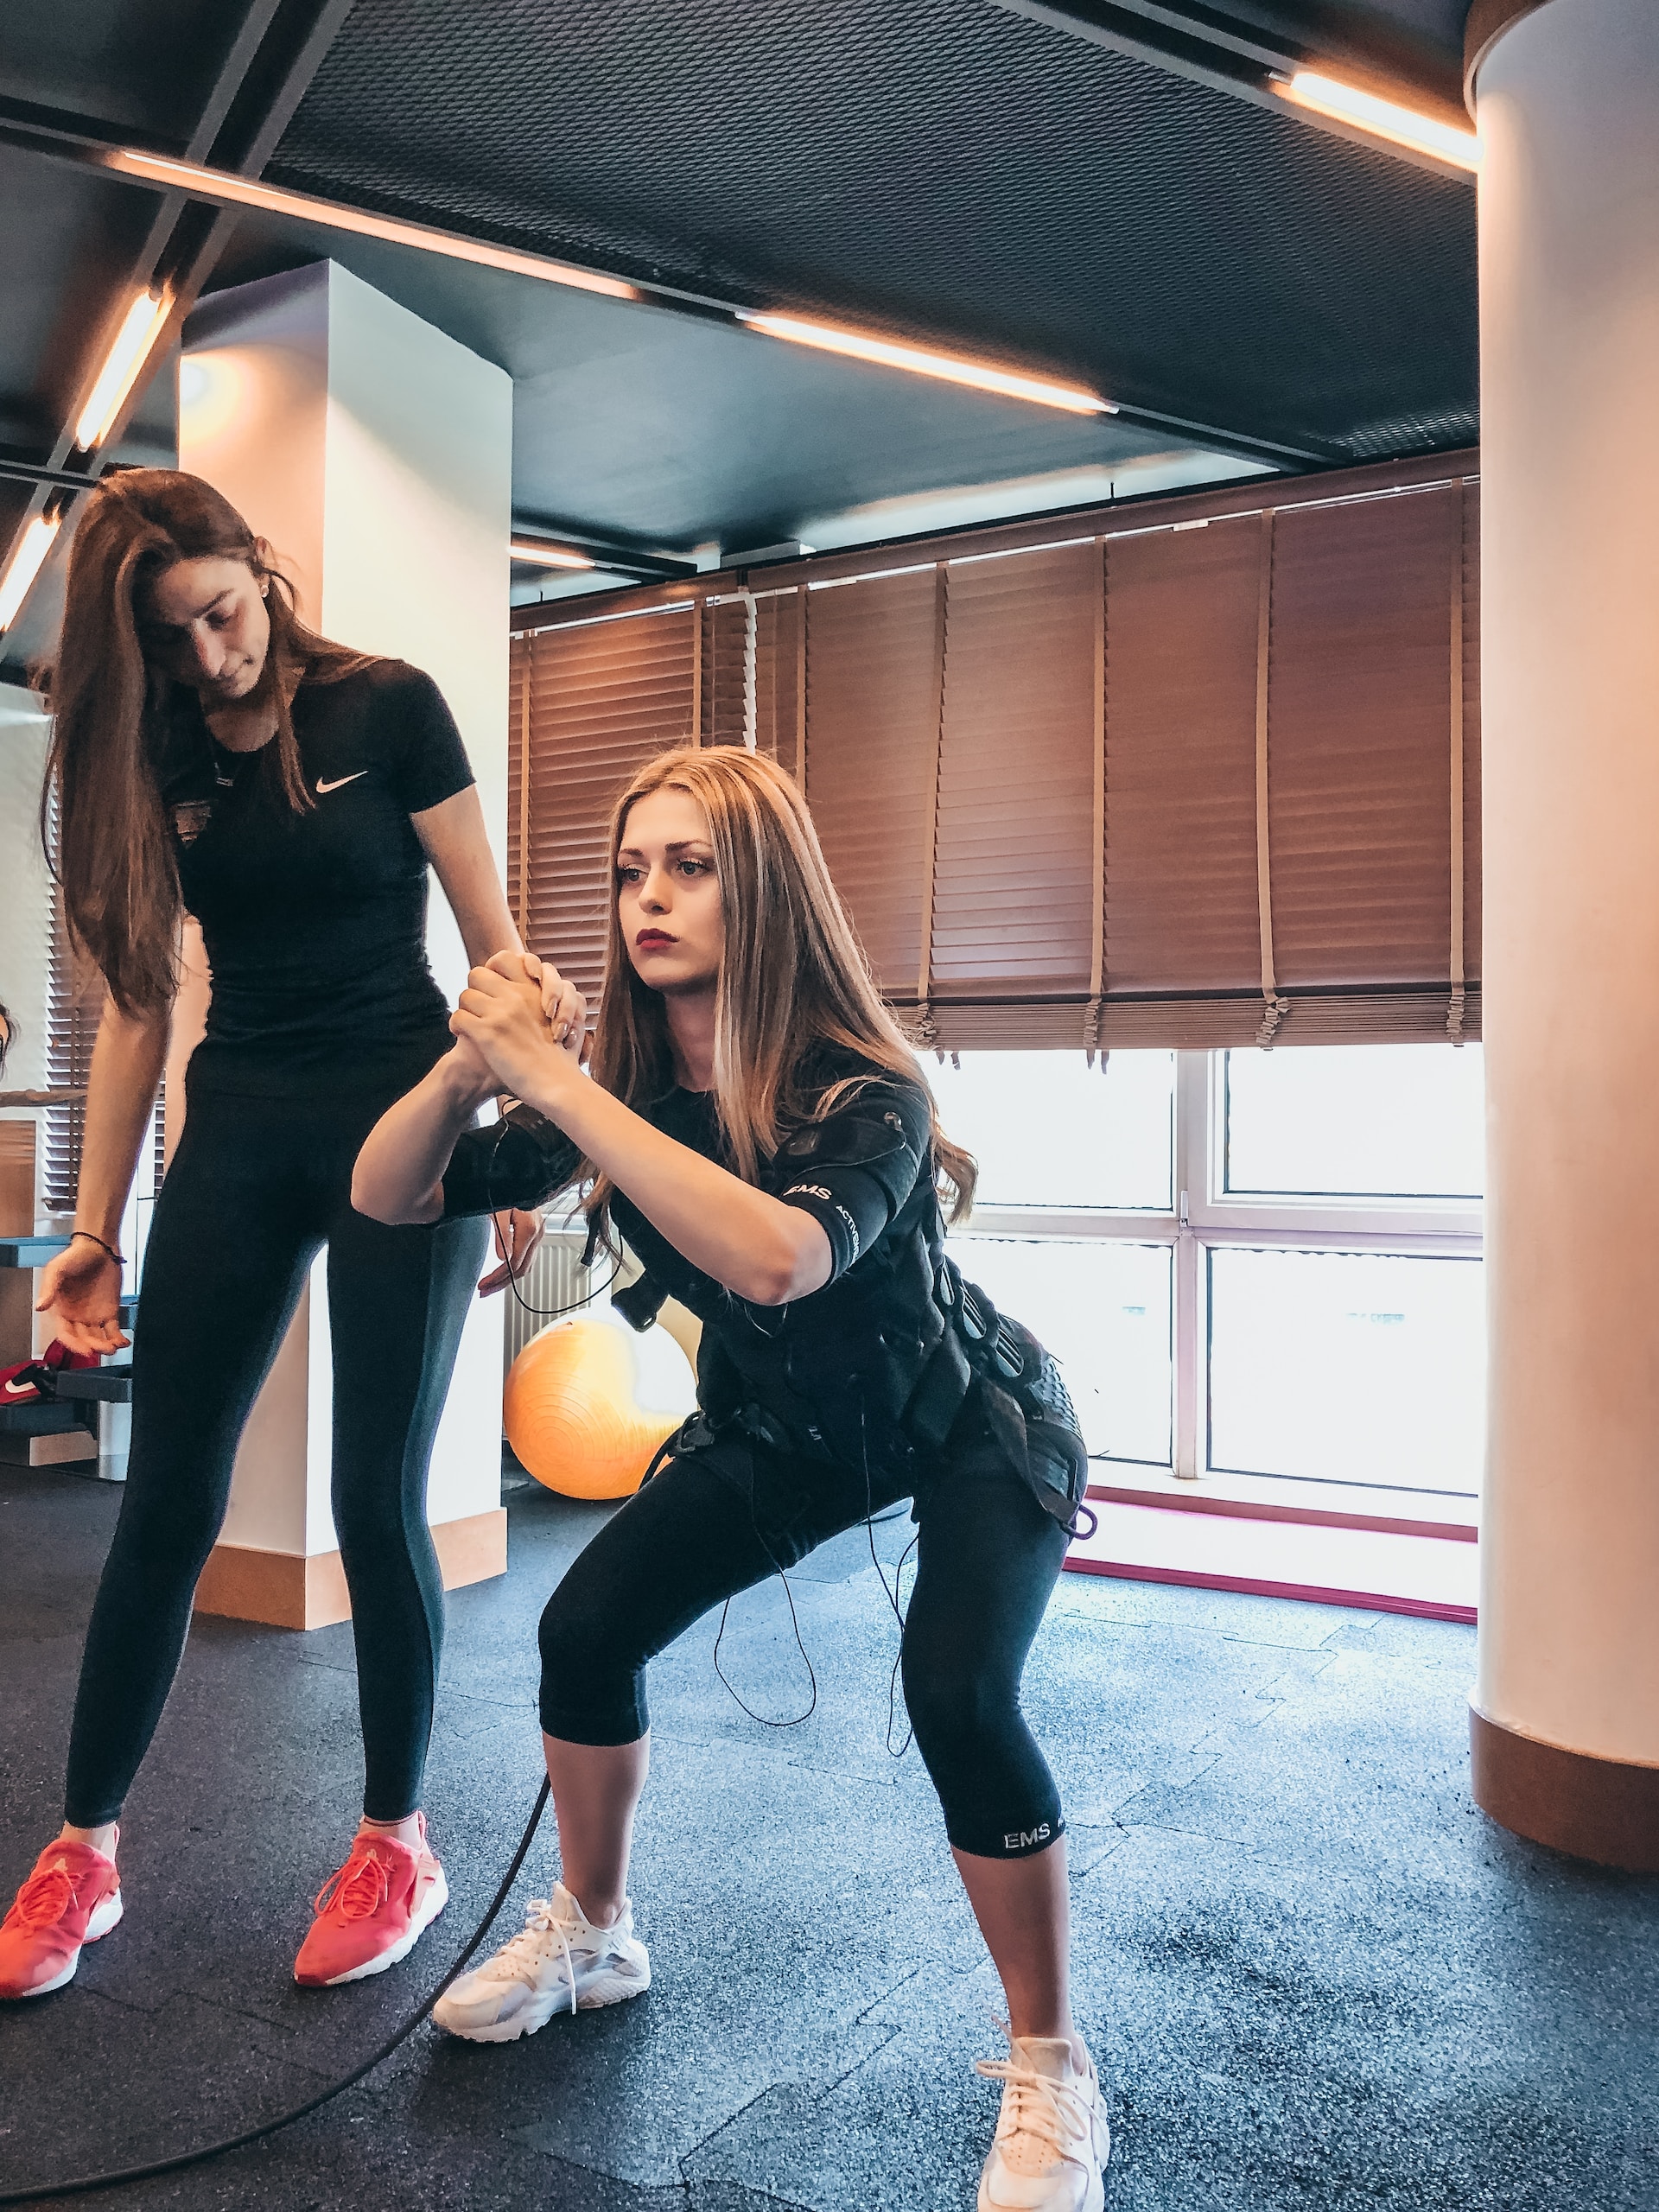 the image shows a woman doing squats with her trainer